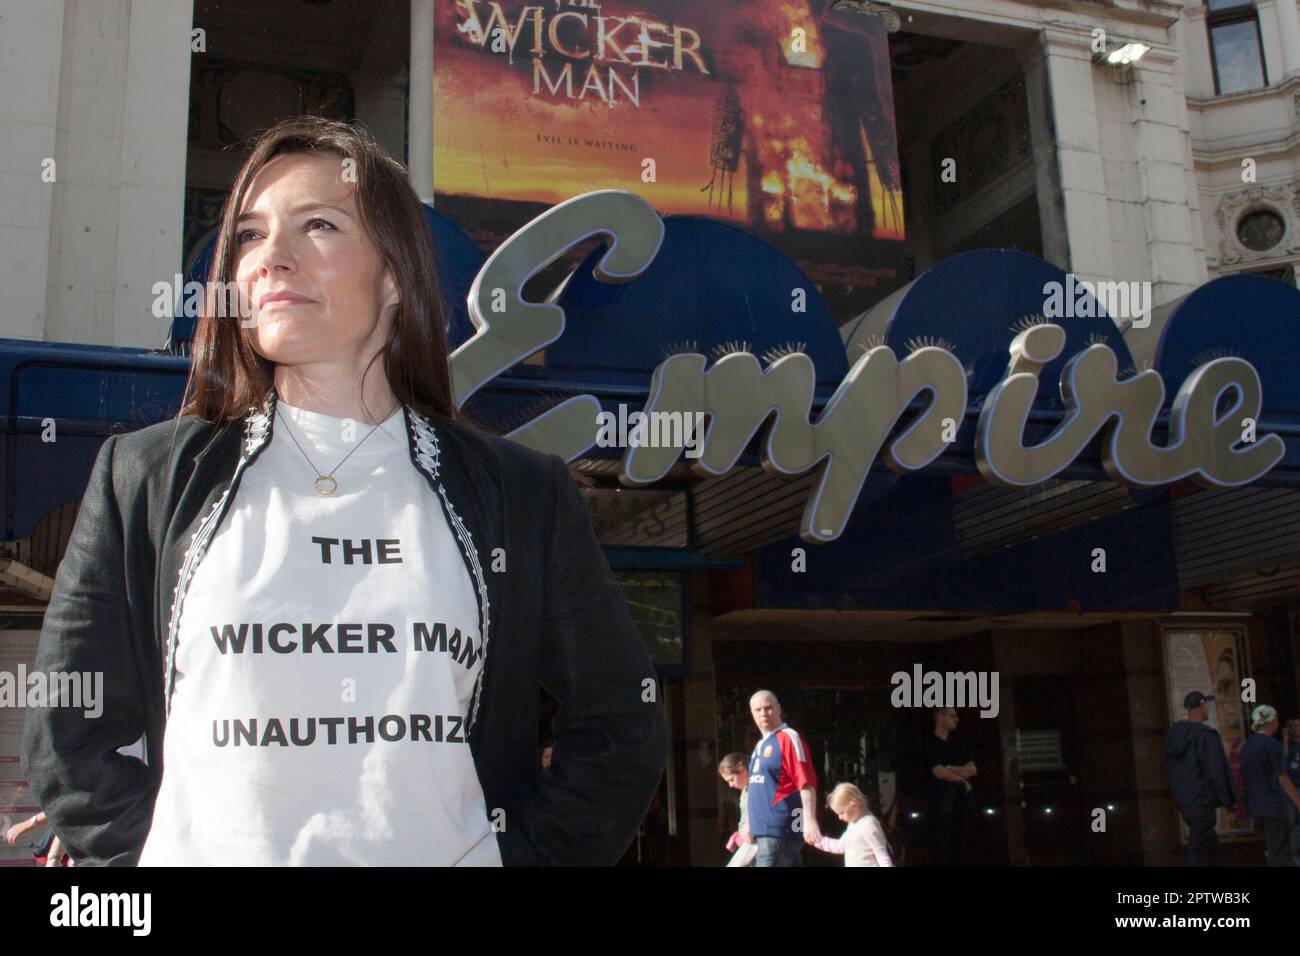 Claudia Shaffer, daughter of Wickerman Screenwriter Anthony Shaffer, shows her disaproval of the unauthorised remake of her father's cult movie, starring Nicolas Cage in London. Stock Photo